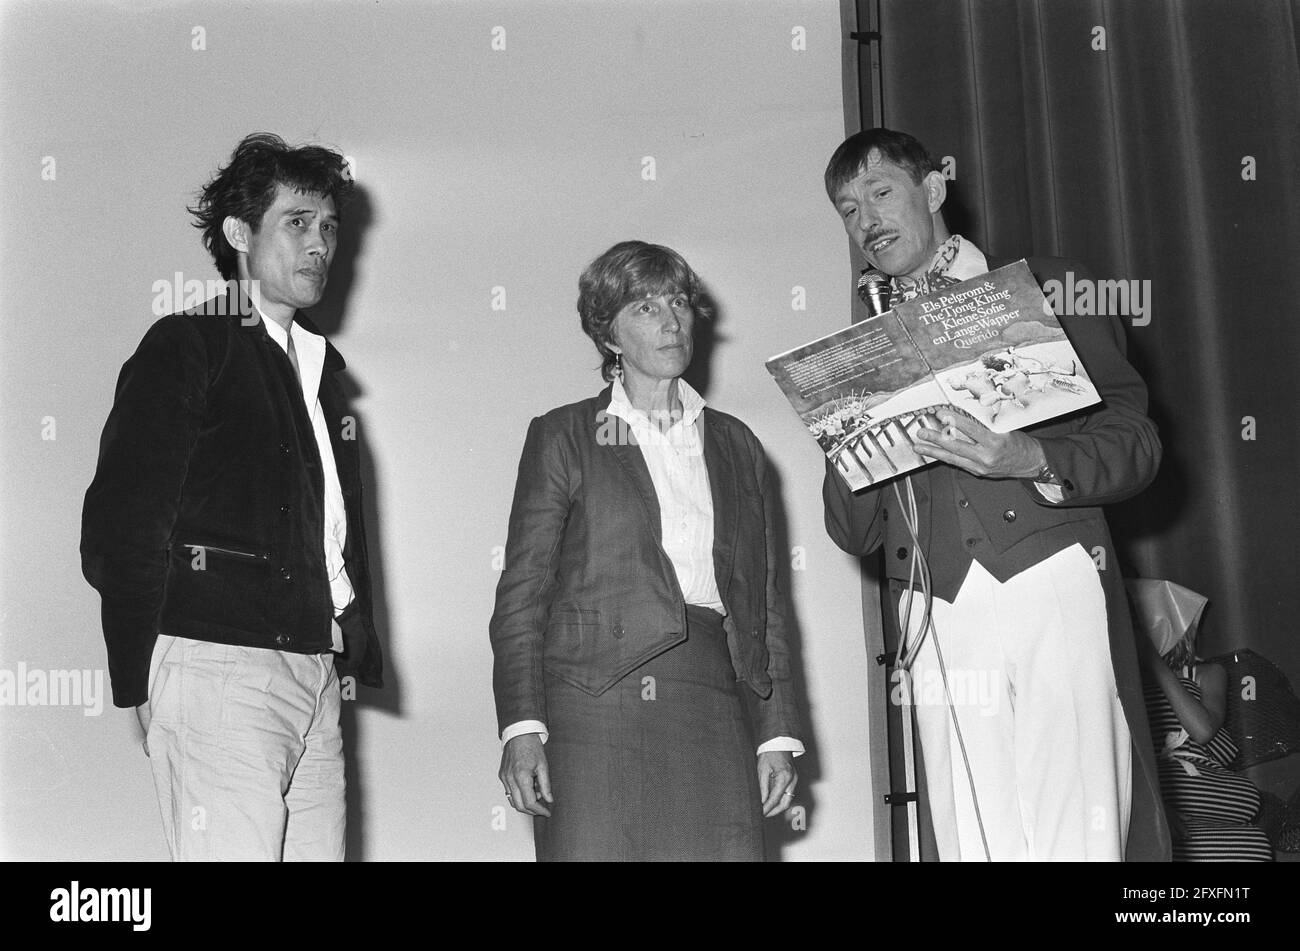 Presentation by Martin Brozius of the Golden Pencil to Els Pelgrom and the Golden Brush to Thé Tjong-Khing, 2 October 1985, children's books, awards, The Netherlands, 20th century press agency photo, news to remember, documentary, historic photography 1945-1990, visual stories, human history of the Twentieth Century, capturing moments in time Stock Photo